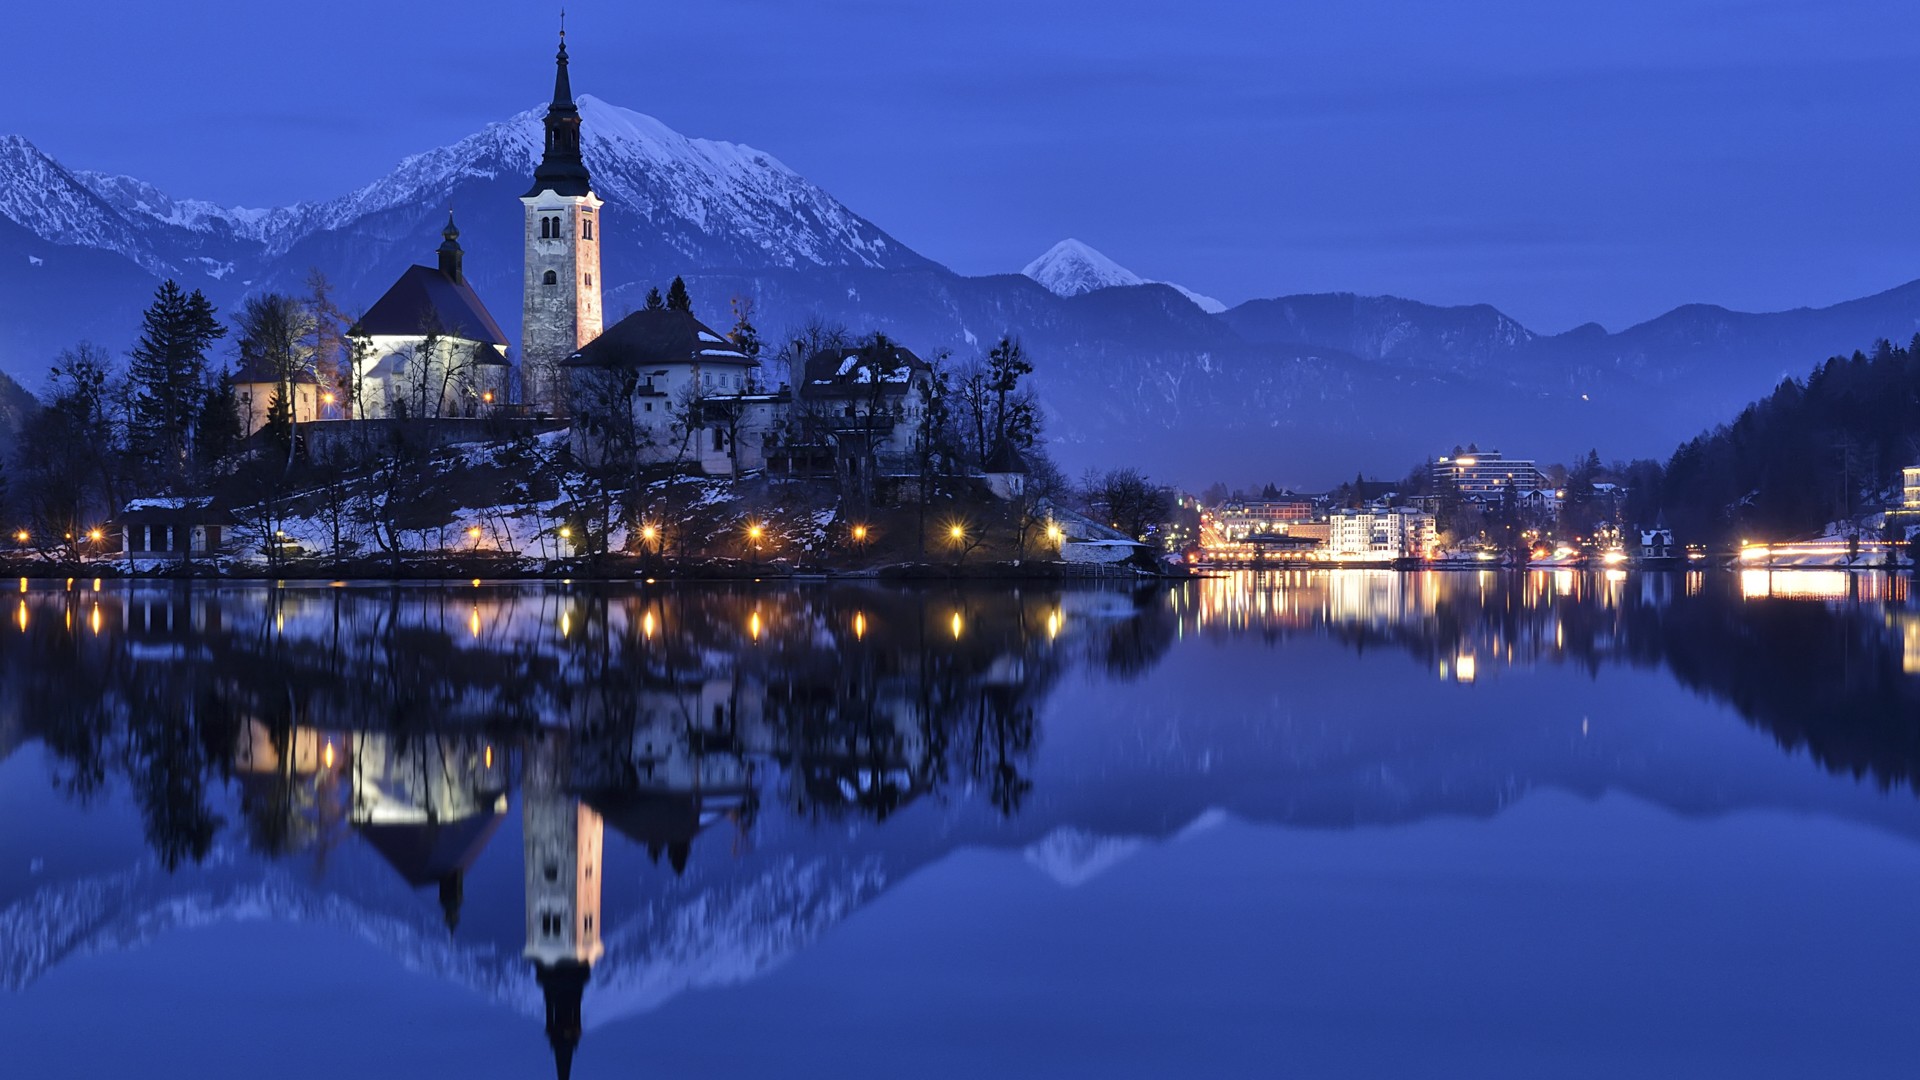 General 1920x1080 landscape Lake Bled reflection mountains city lights calm waters calm blue tower church winter city Slovenia island lake